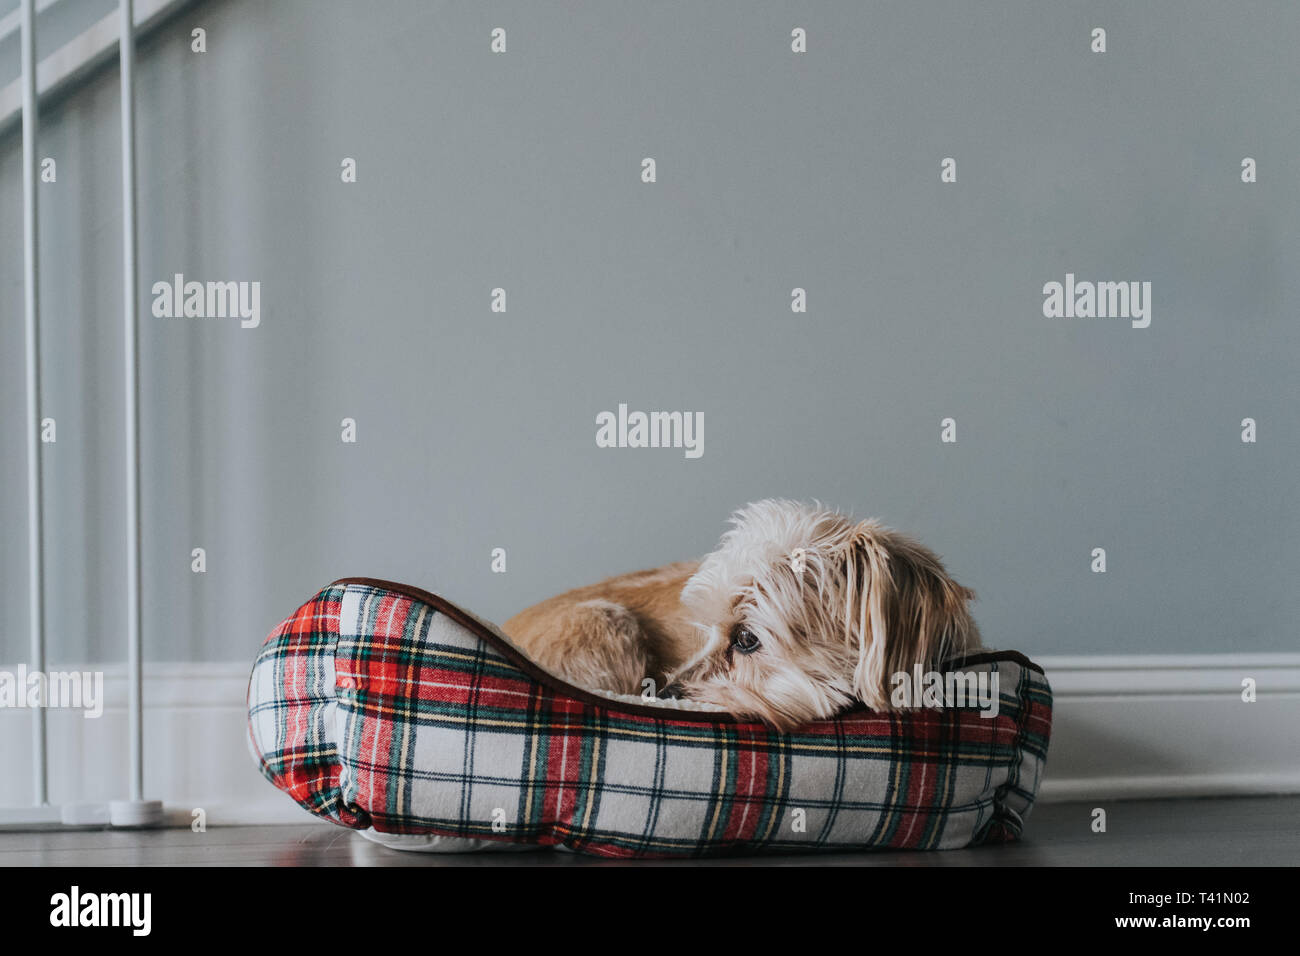 Little terrier dog in a bed Stock Photo